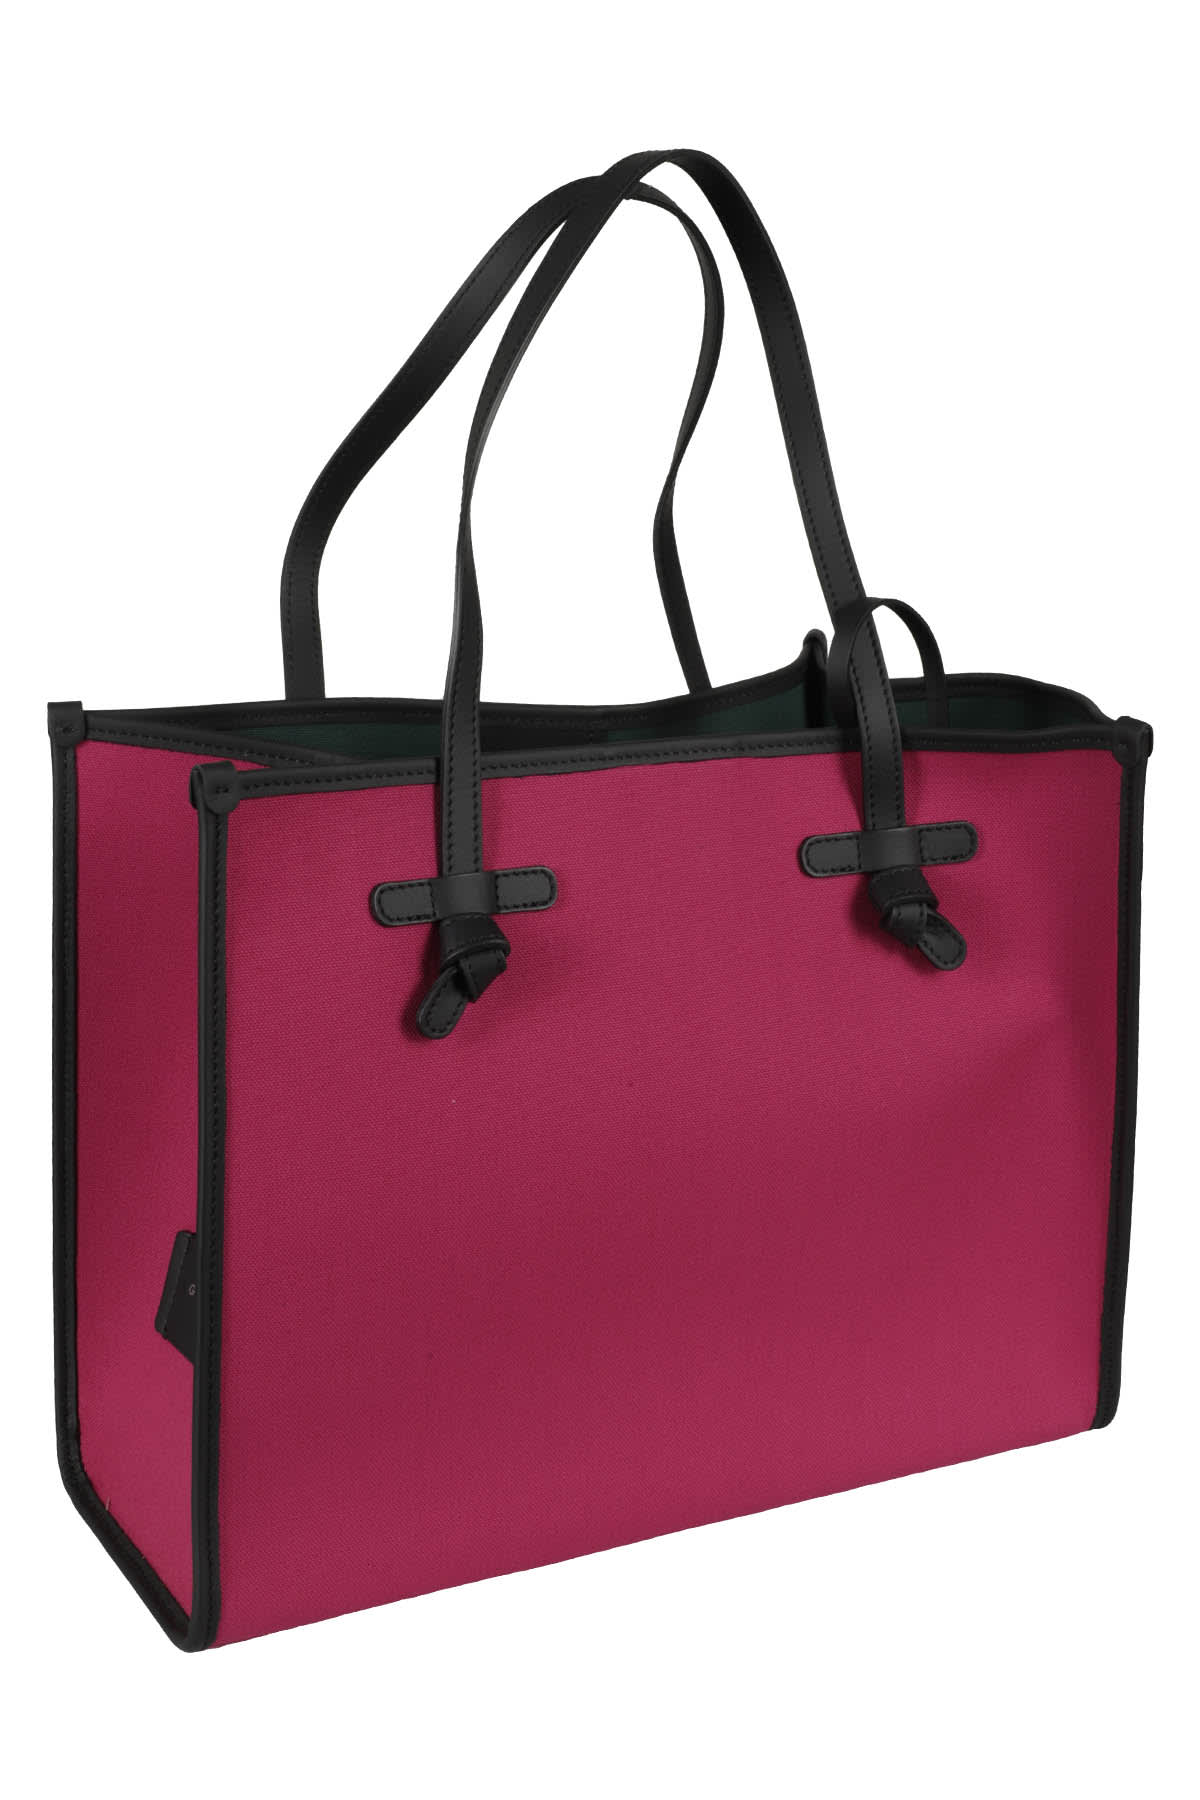 Shop Gianni Chiarini Marcella In Hot Pink Forest